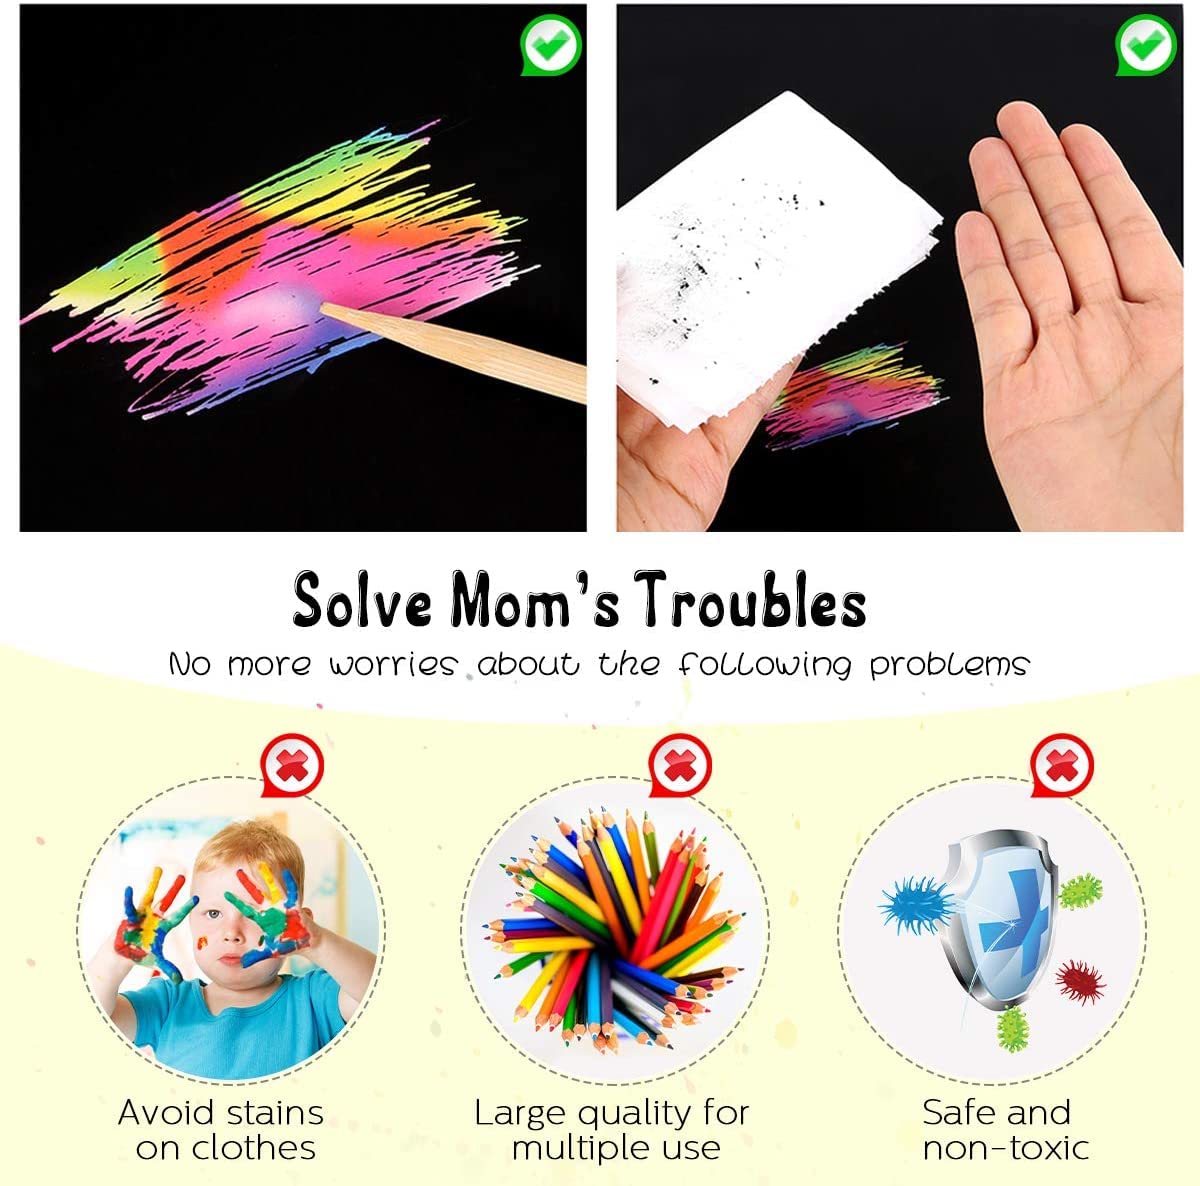 ZMLM Rainbow Scratch Mini Art Notes - 125 Magic Note Pads Cards Sheets for Kids Black Crafts Arts DIY Party Favor Supplies Kit Birthday Game Toy Gifts Box Girls Boys Halloween